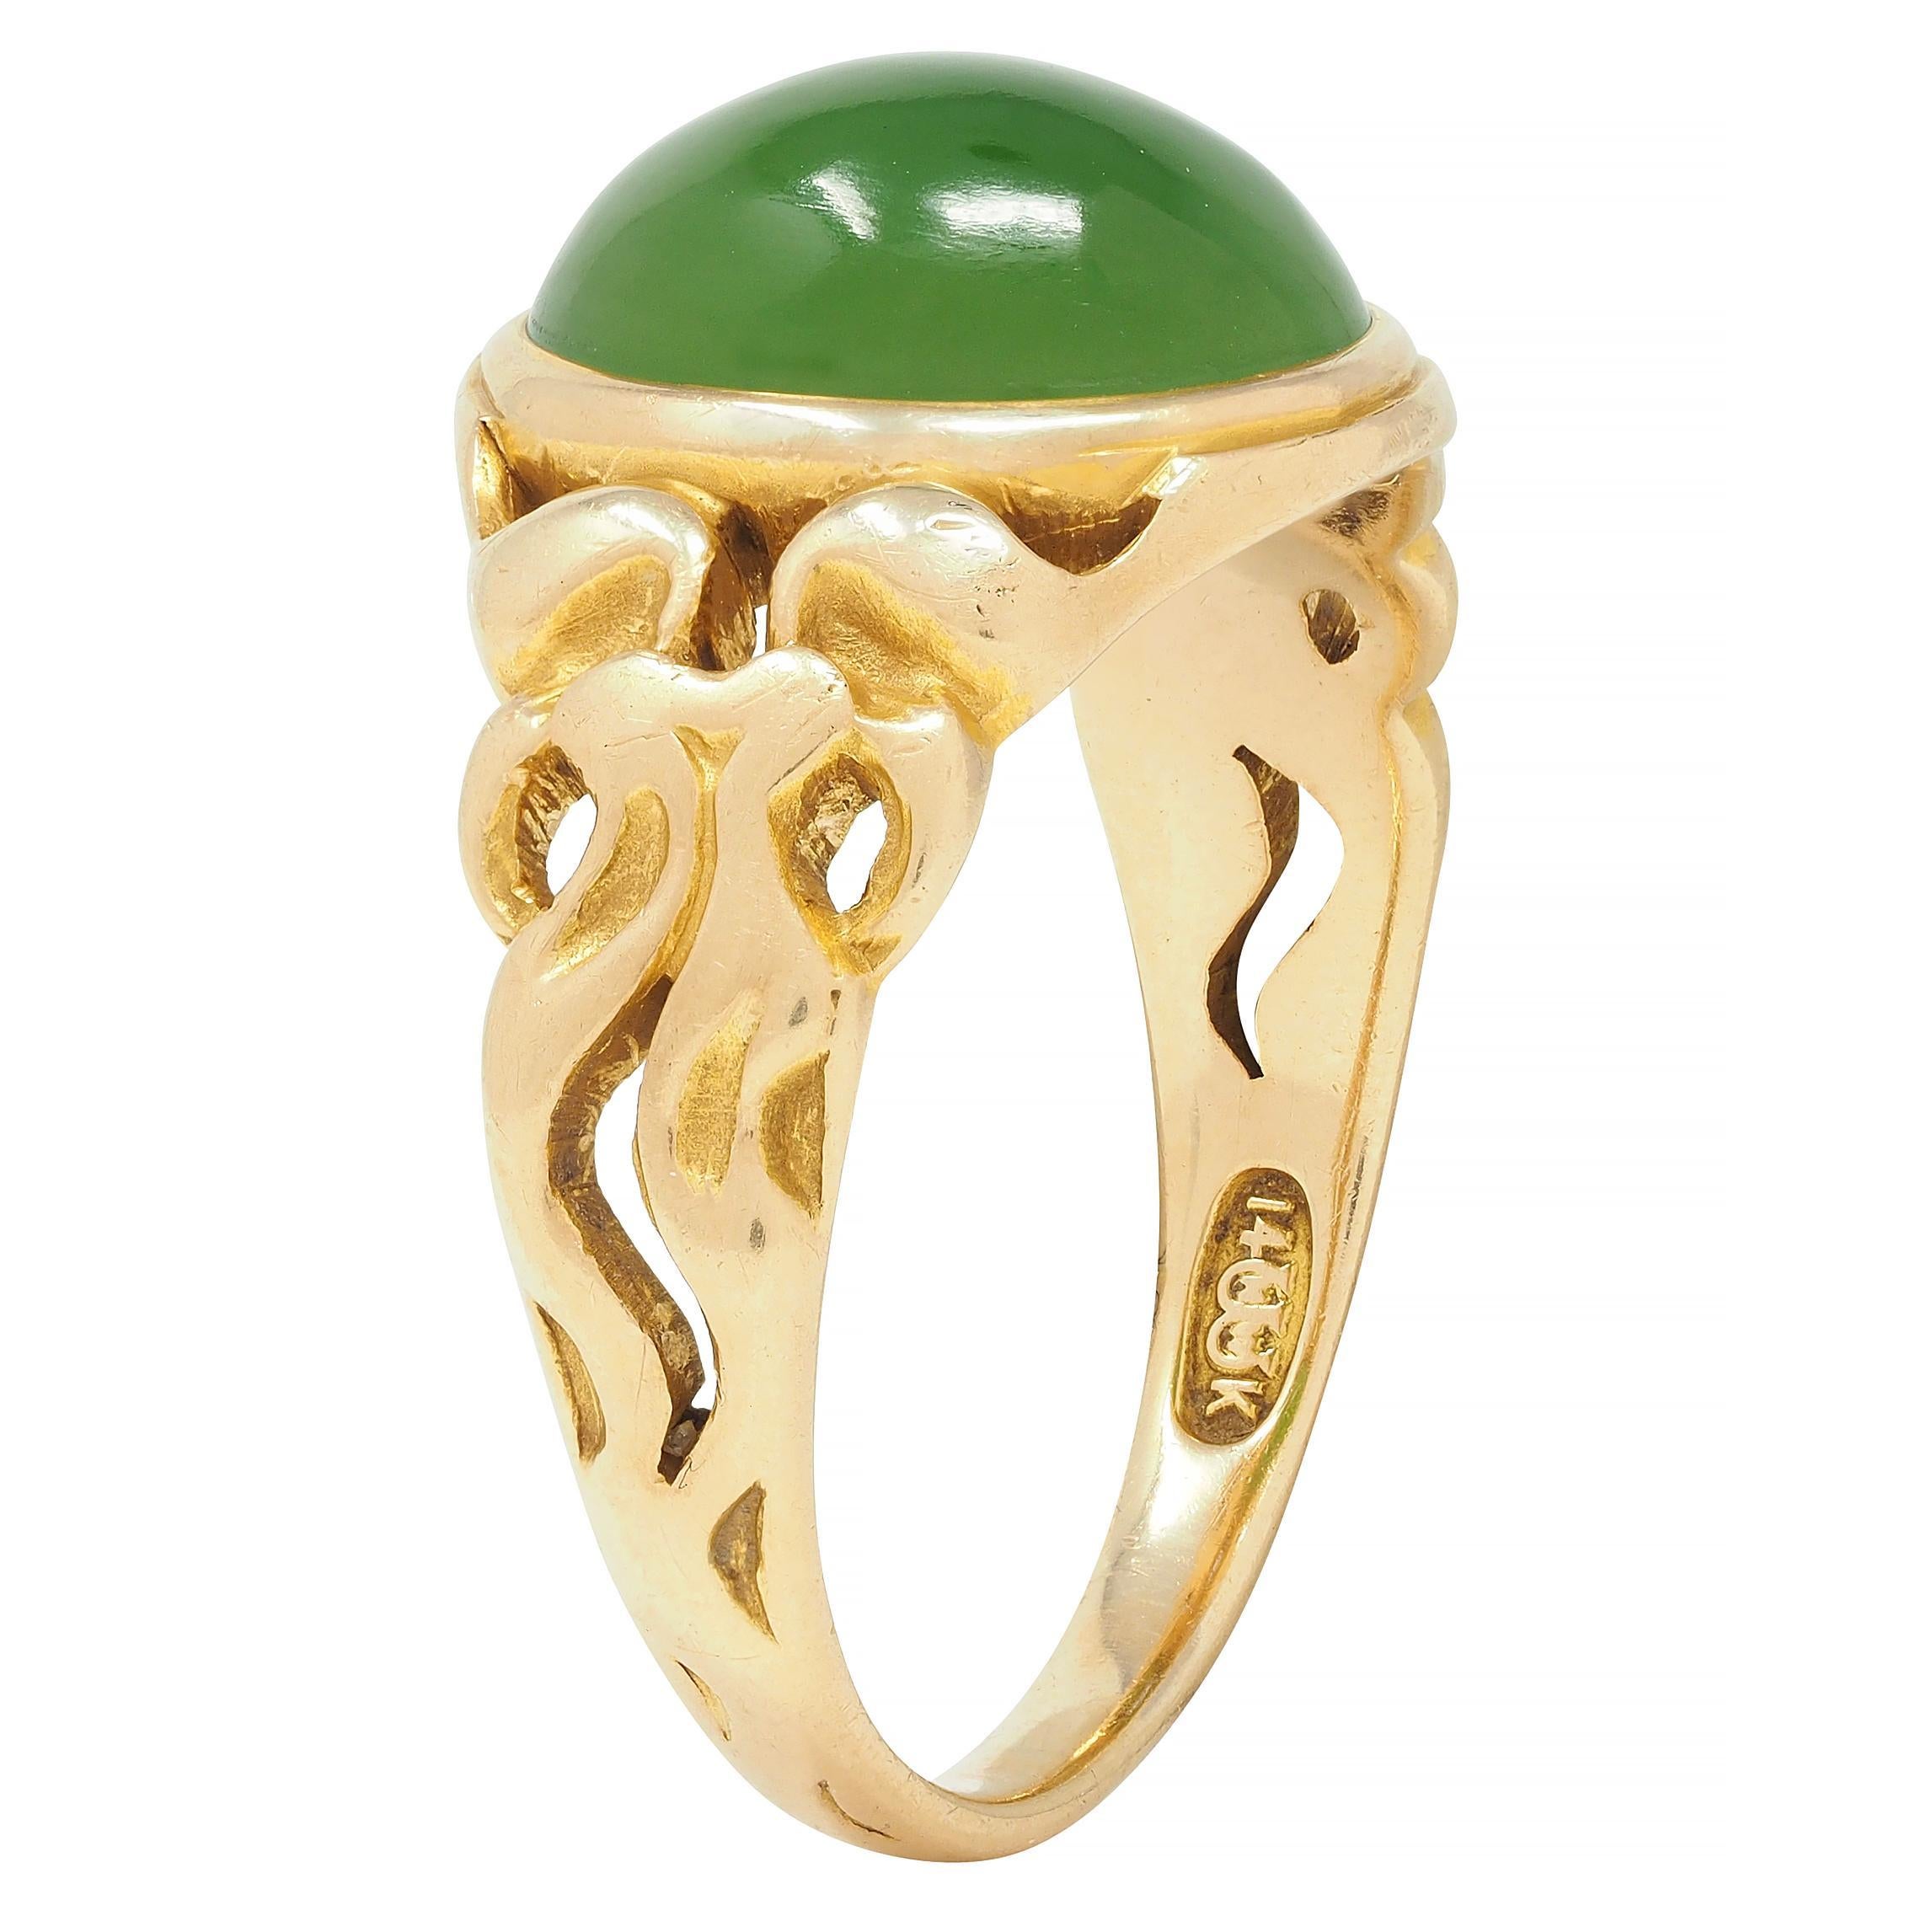 Centering a oval-shaped nephrite jade cabochon measuring 9.1 x 11.9 mm - opaque green with medium saturation 
Bezel set in a yellow gold surround
Accented by pierced stylized bow motif shoulders with pattern extending to base 
Stamped for 14 karat